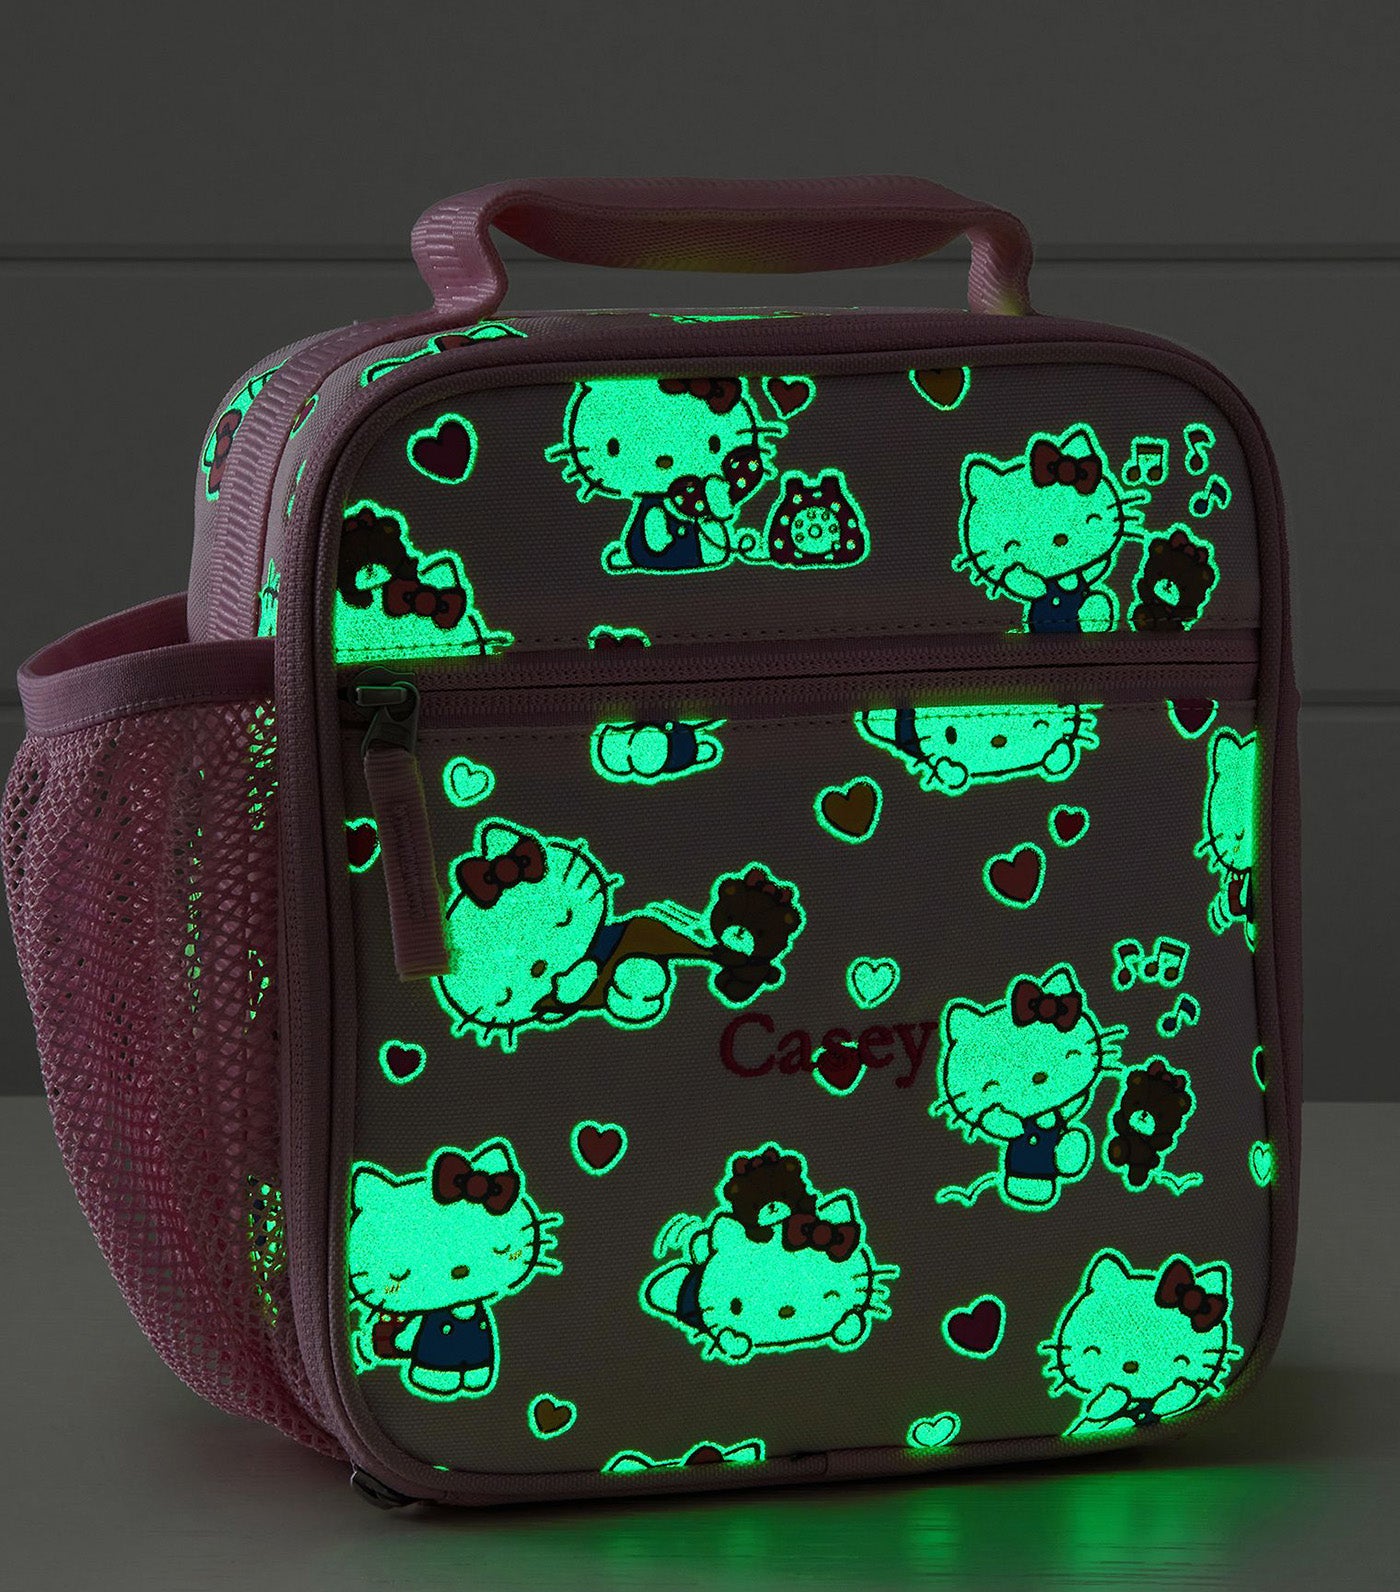 Mackenzie Hello Kitty® Hearts Glow-in-the-Dark Lunch Boxes - Classic